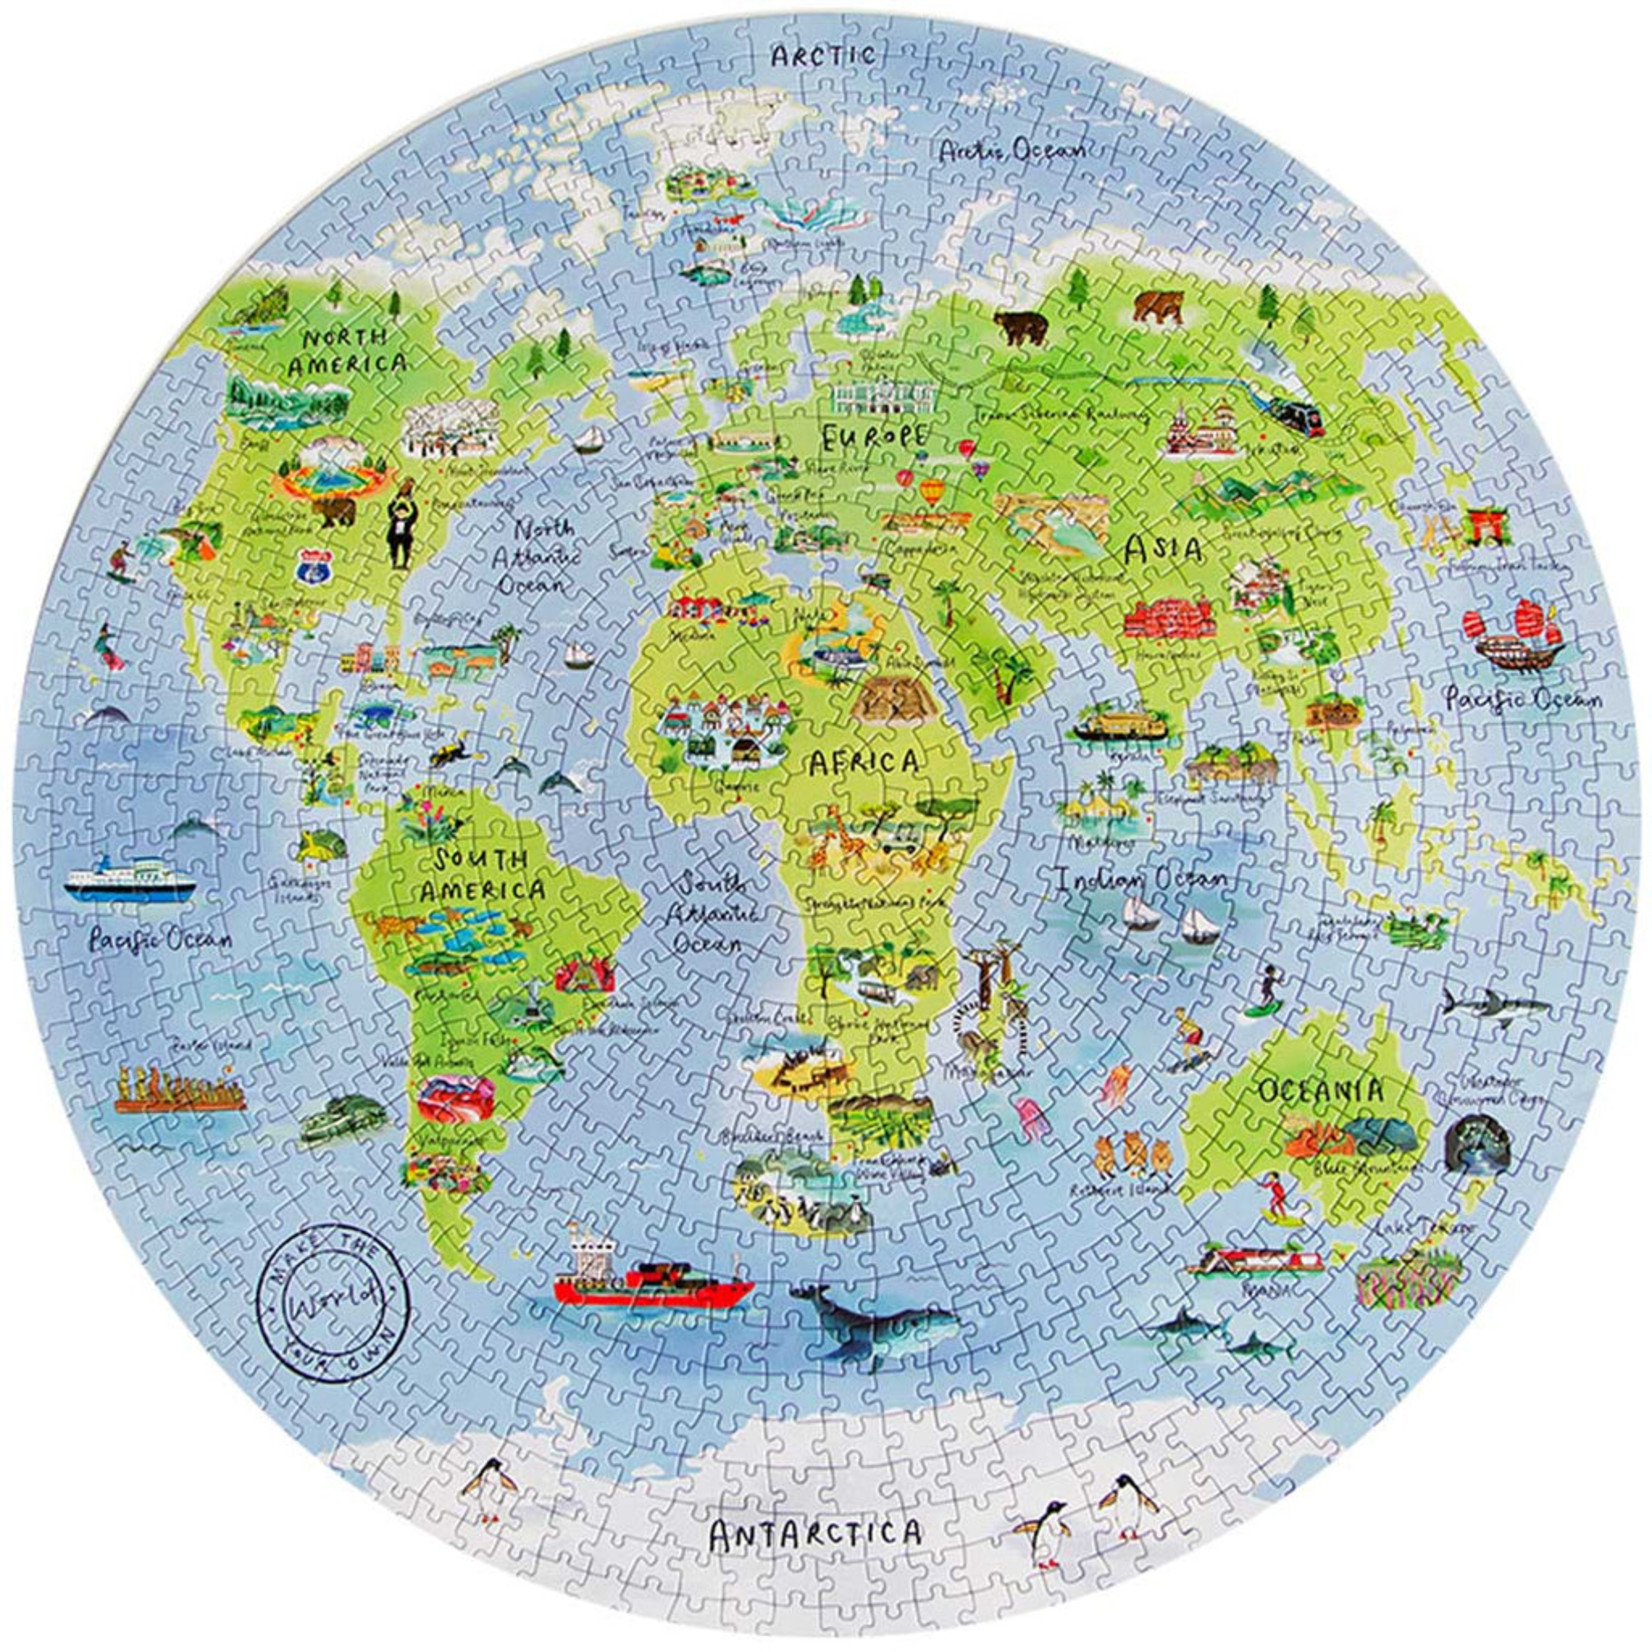 Talking Tables Circular World Map Puzzle 1000 Piece